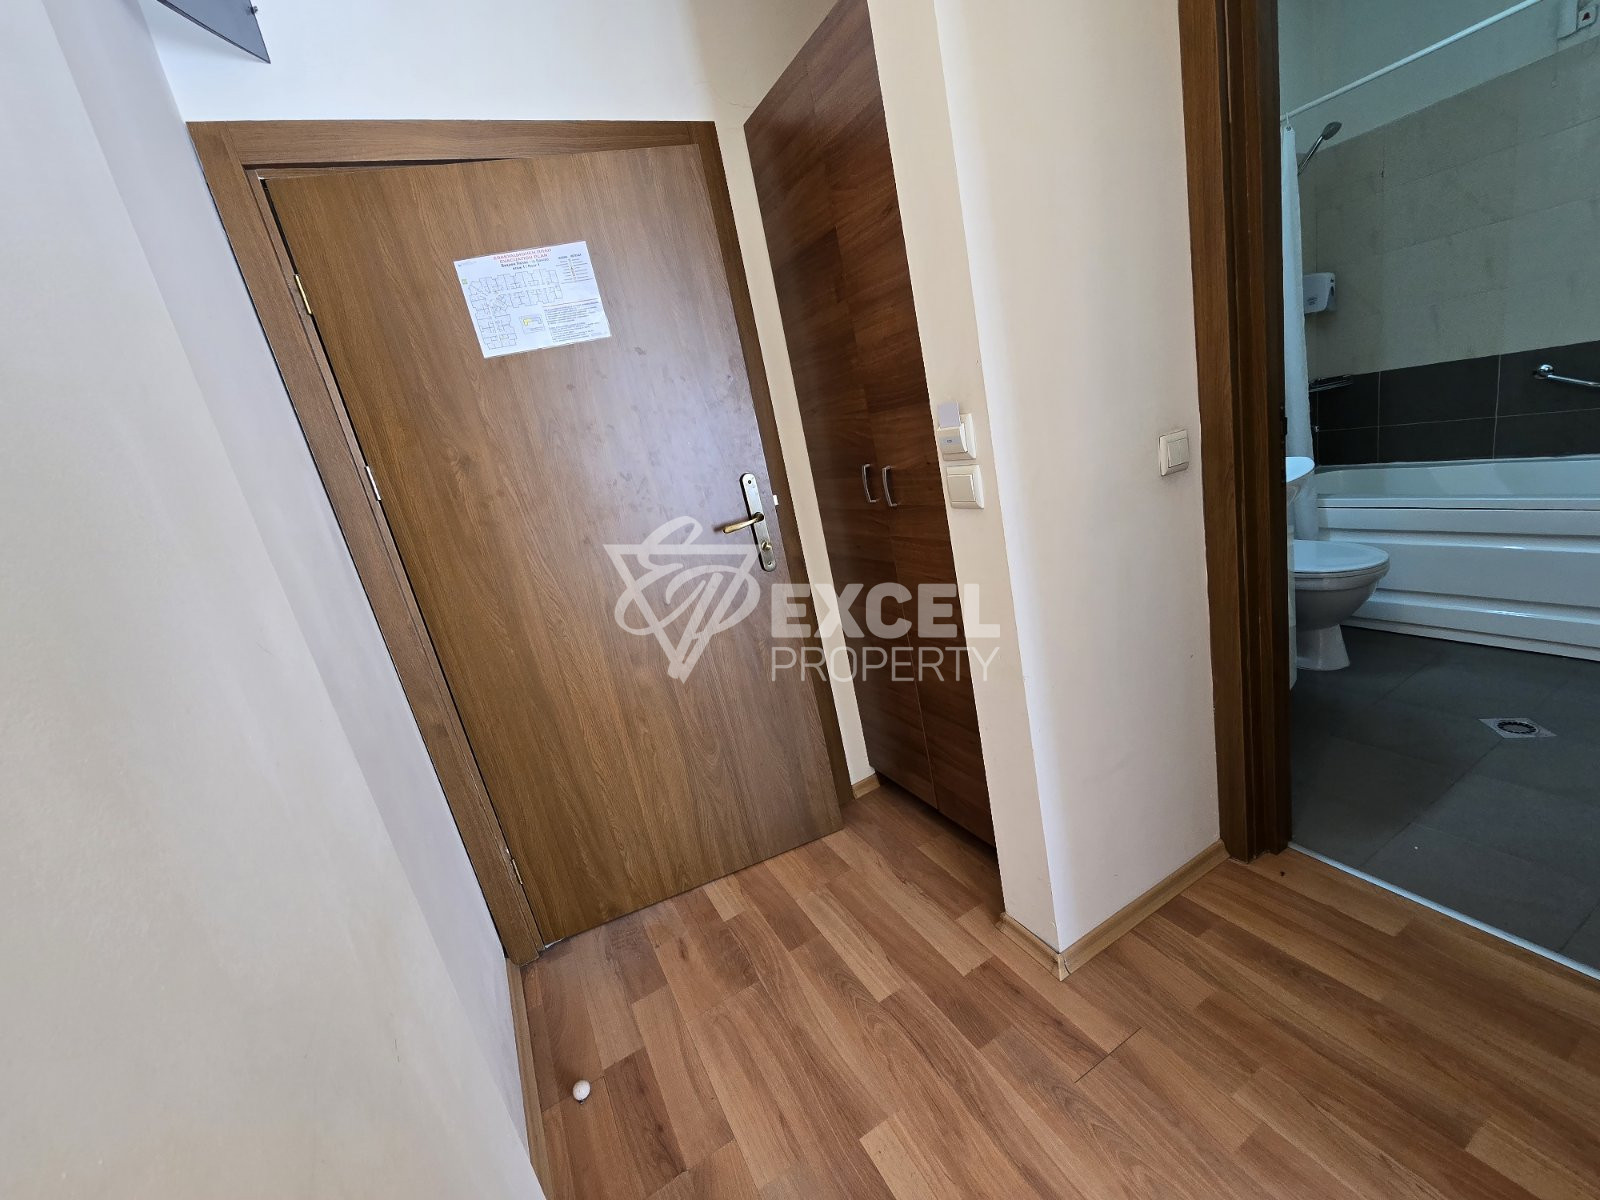 Furnished two-bedroom apartment for sale 50 meters from the ski lift, Bansko